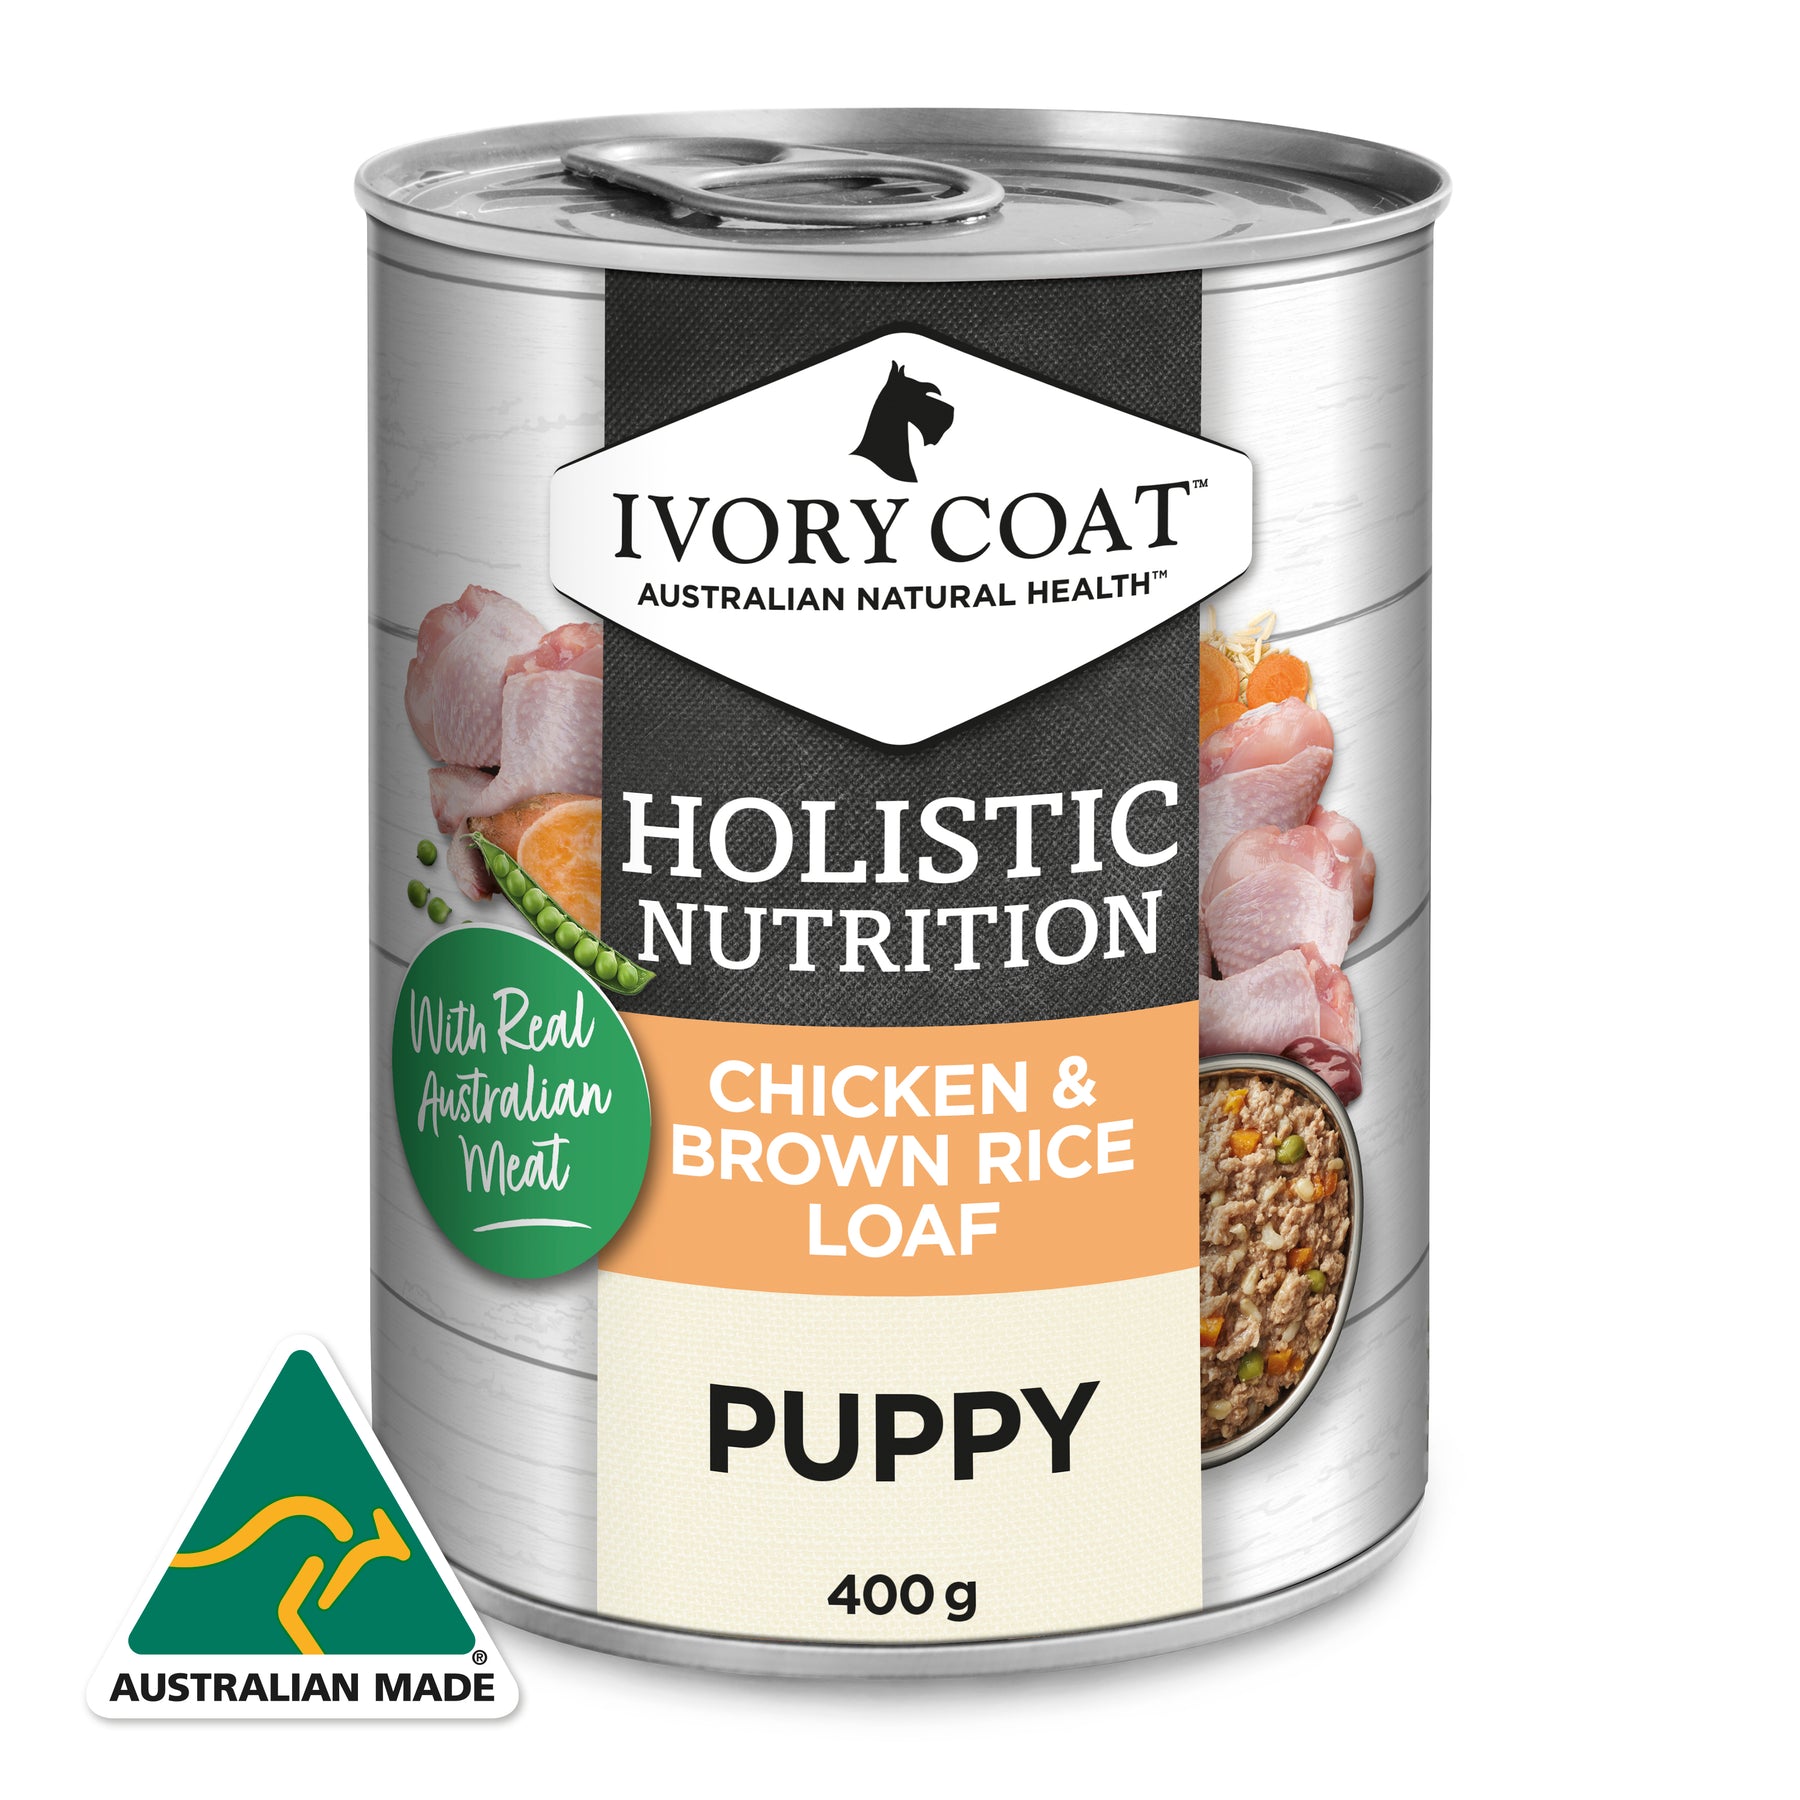 Holistic Nutrition Puppy Wet Dog Food Chicken & Brown Rice Loaf 400g